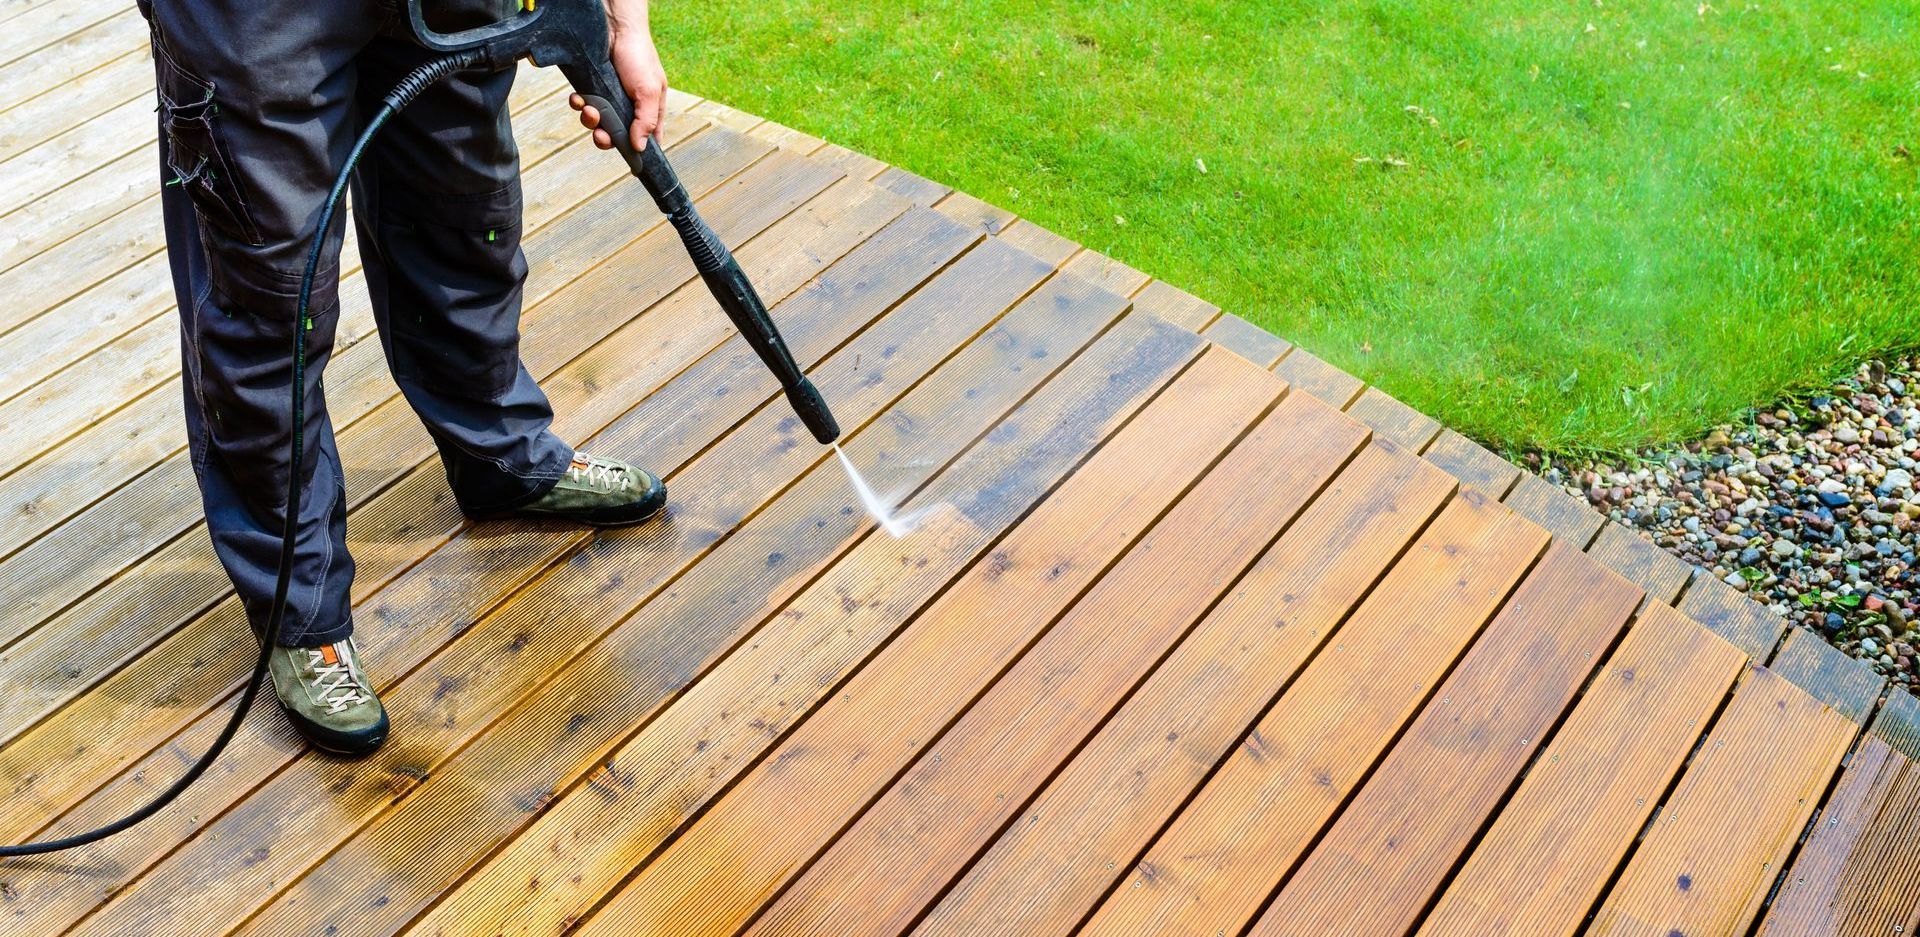 Best Residential Power Washing Company- Power Washer- Bel Air, MD